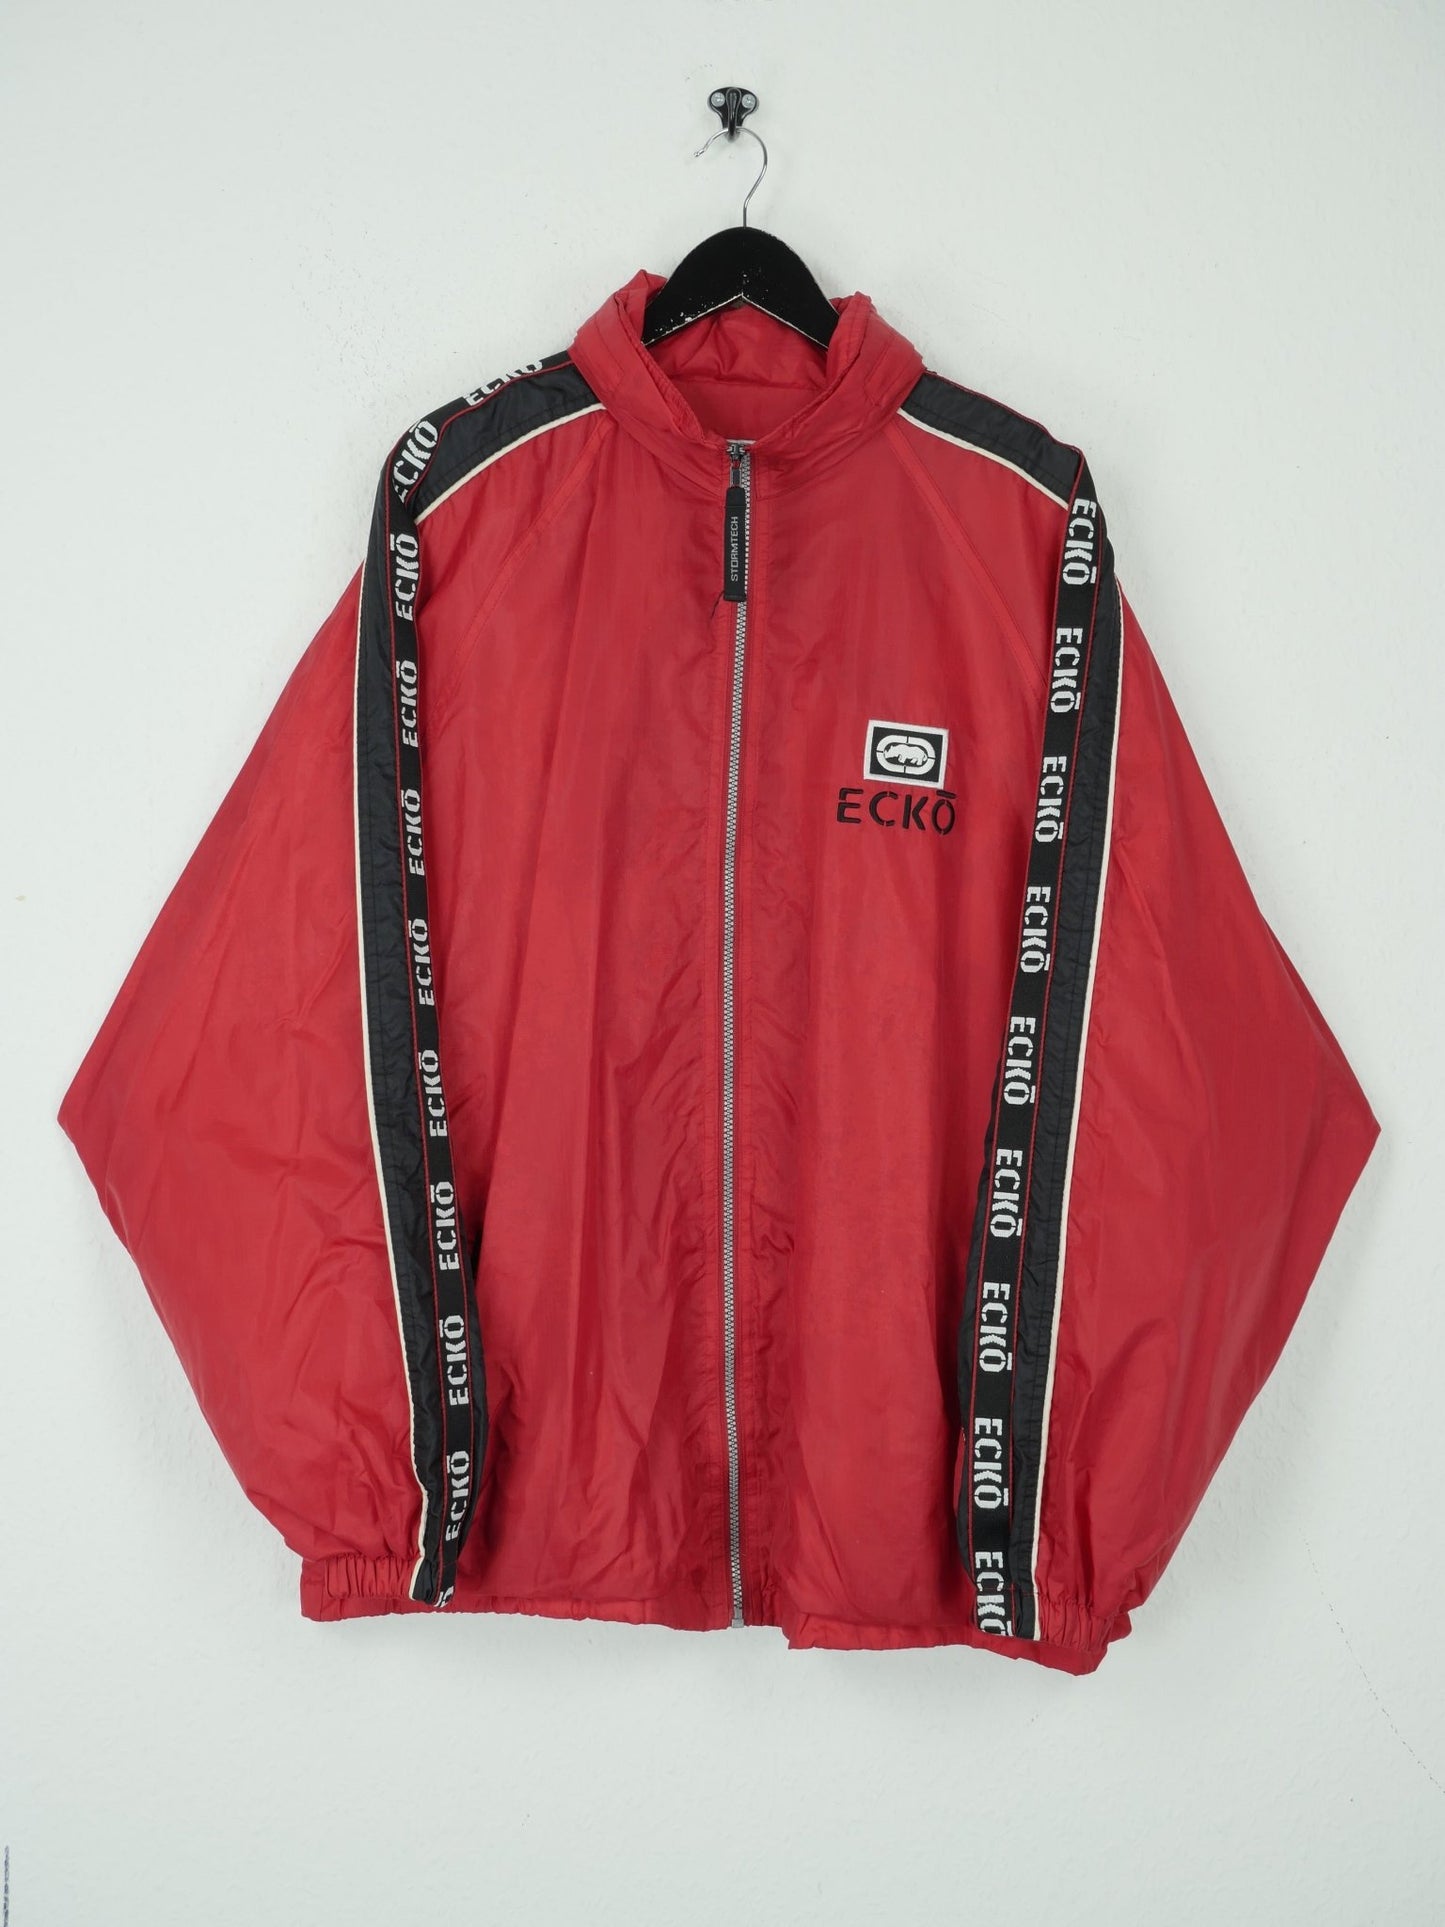 Ecko Unlimited embroidered Logo red Track Jacket - Peeces